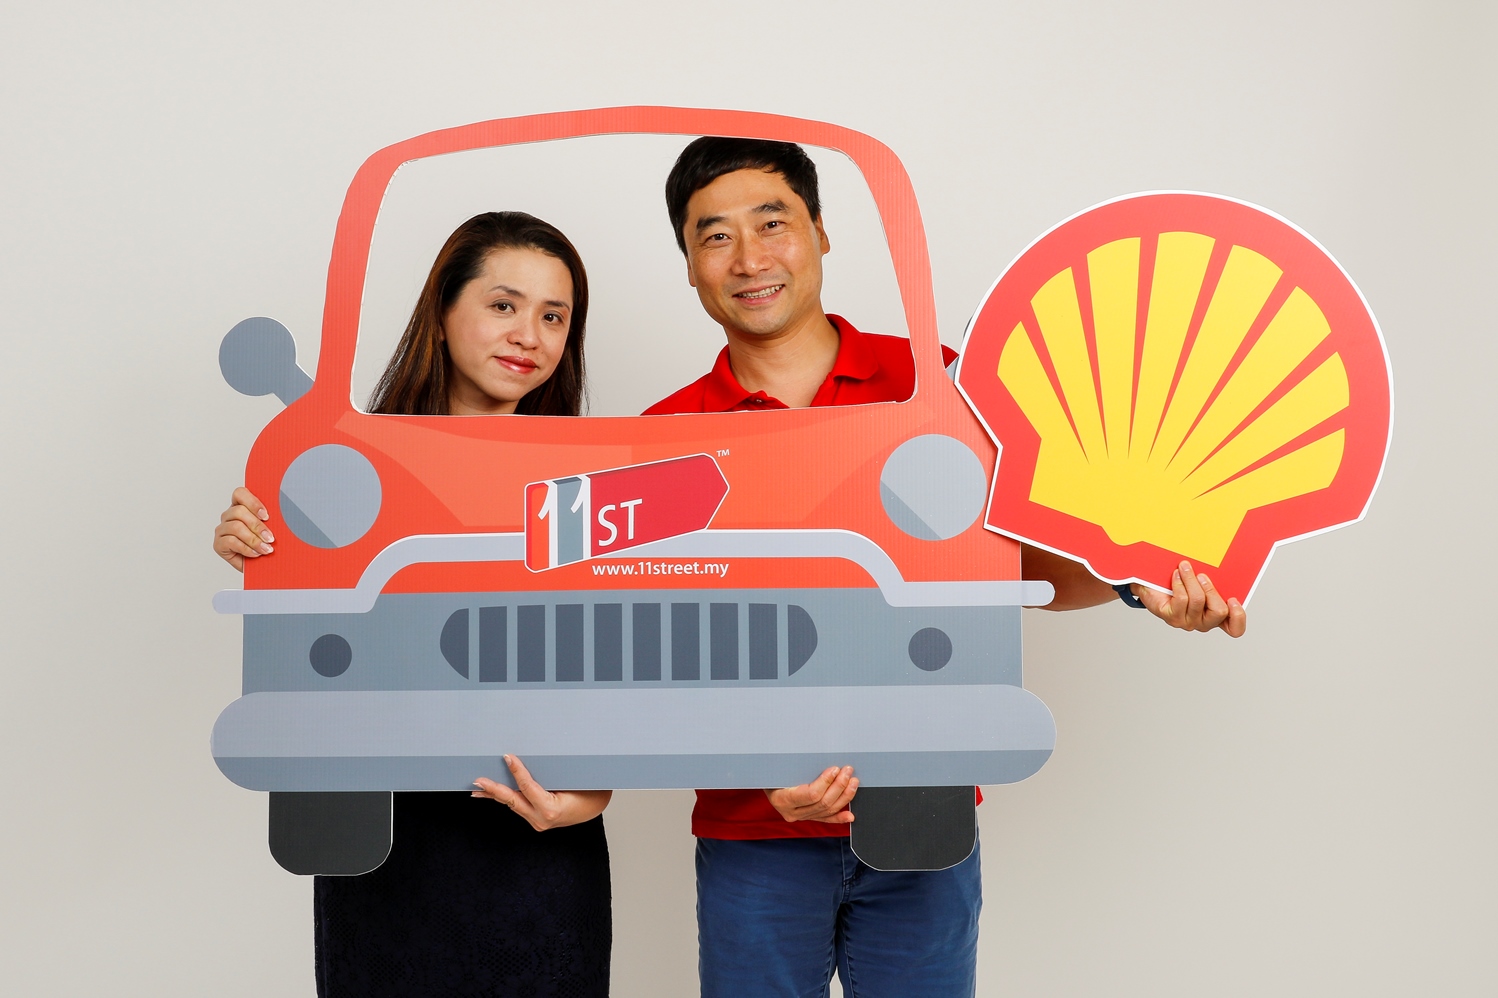 Shell Malaysia expands online offerings through 11street collaboration